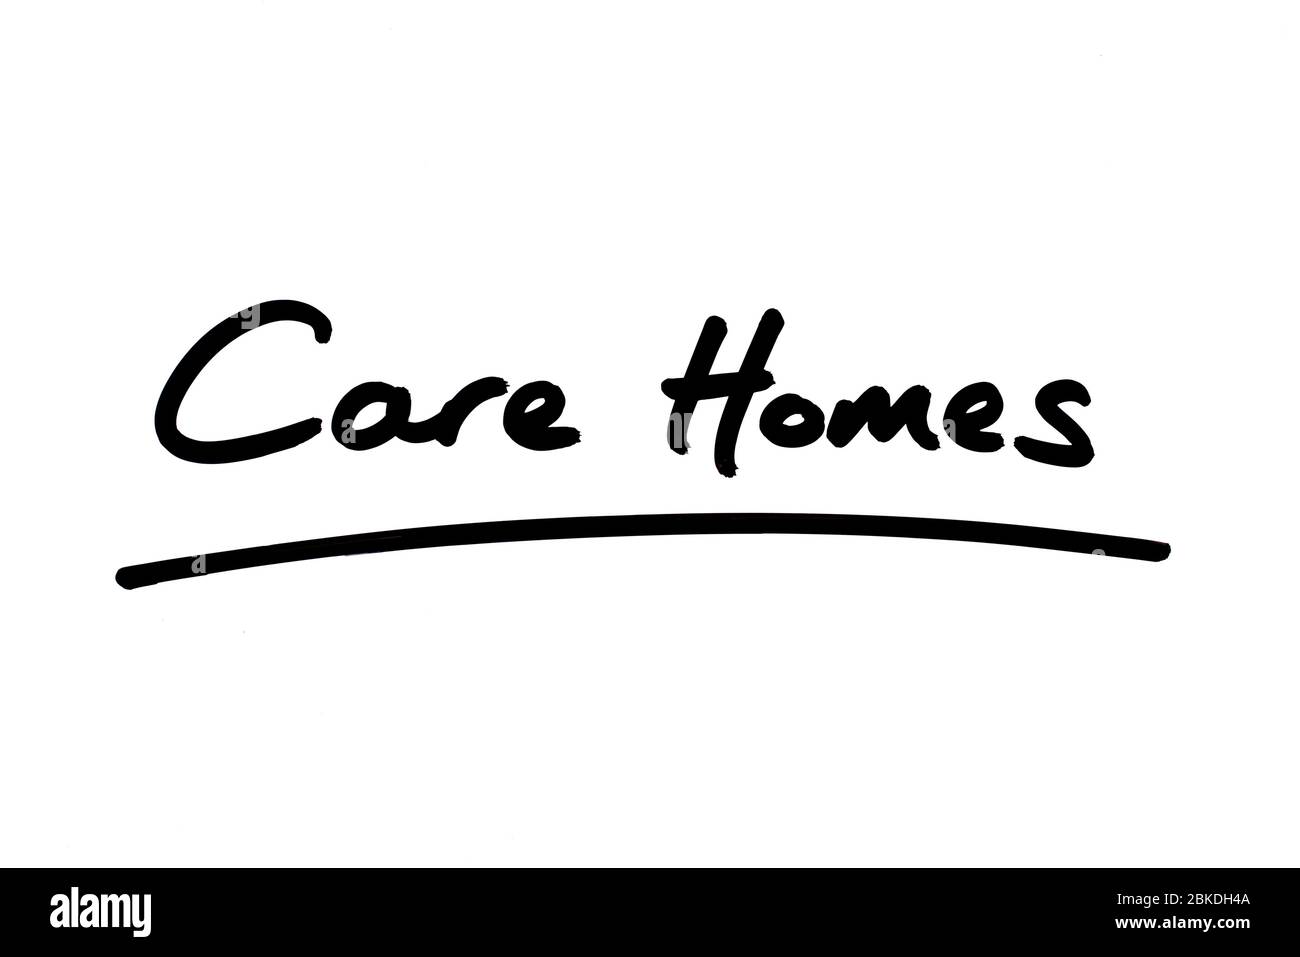 Care Homes handwritten on a white background. Stock Photo